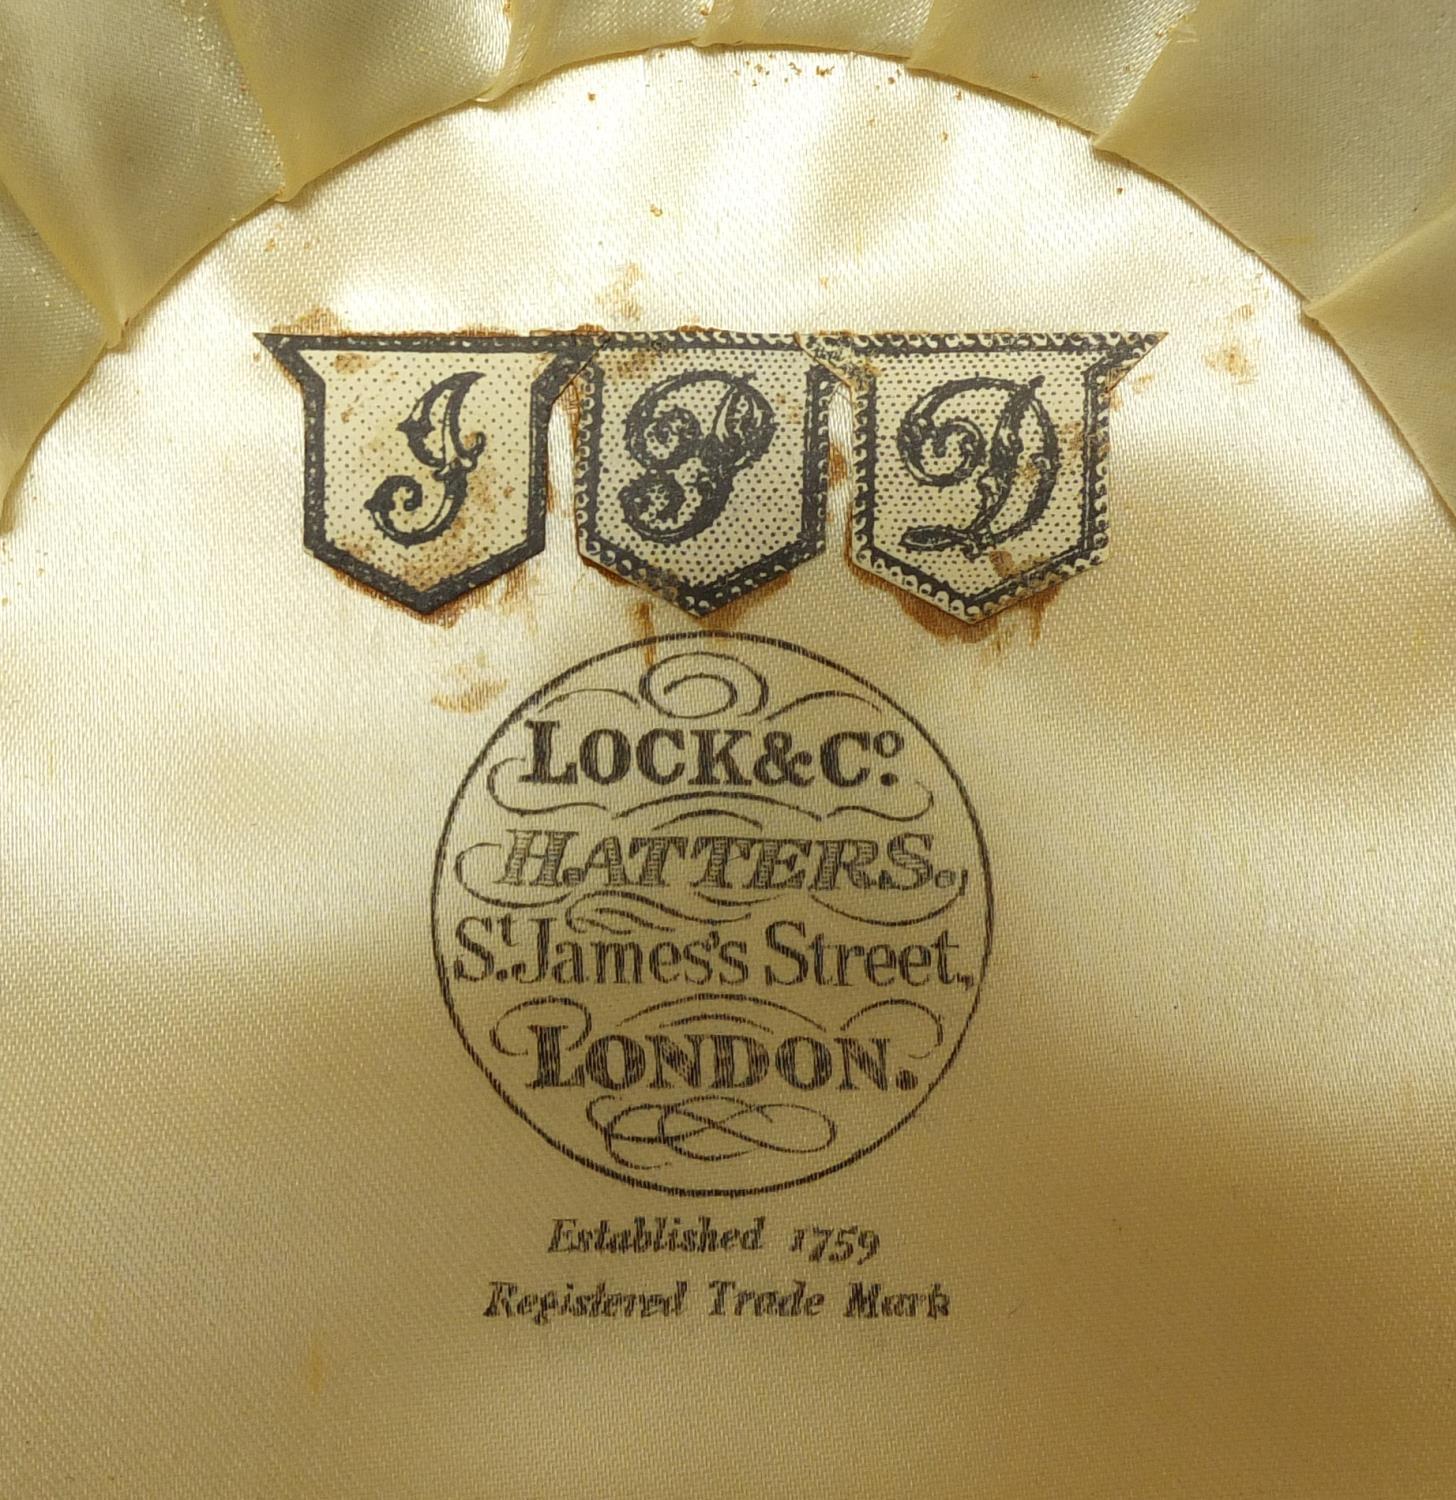 Gentleman's bowler hat retailed by Lock and Co, London, with box, the interior measurements, 21cm - Image 8 of 8